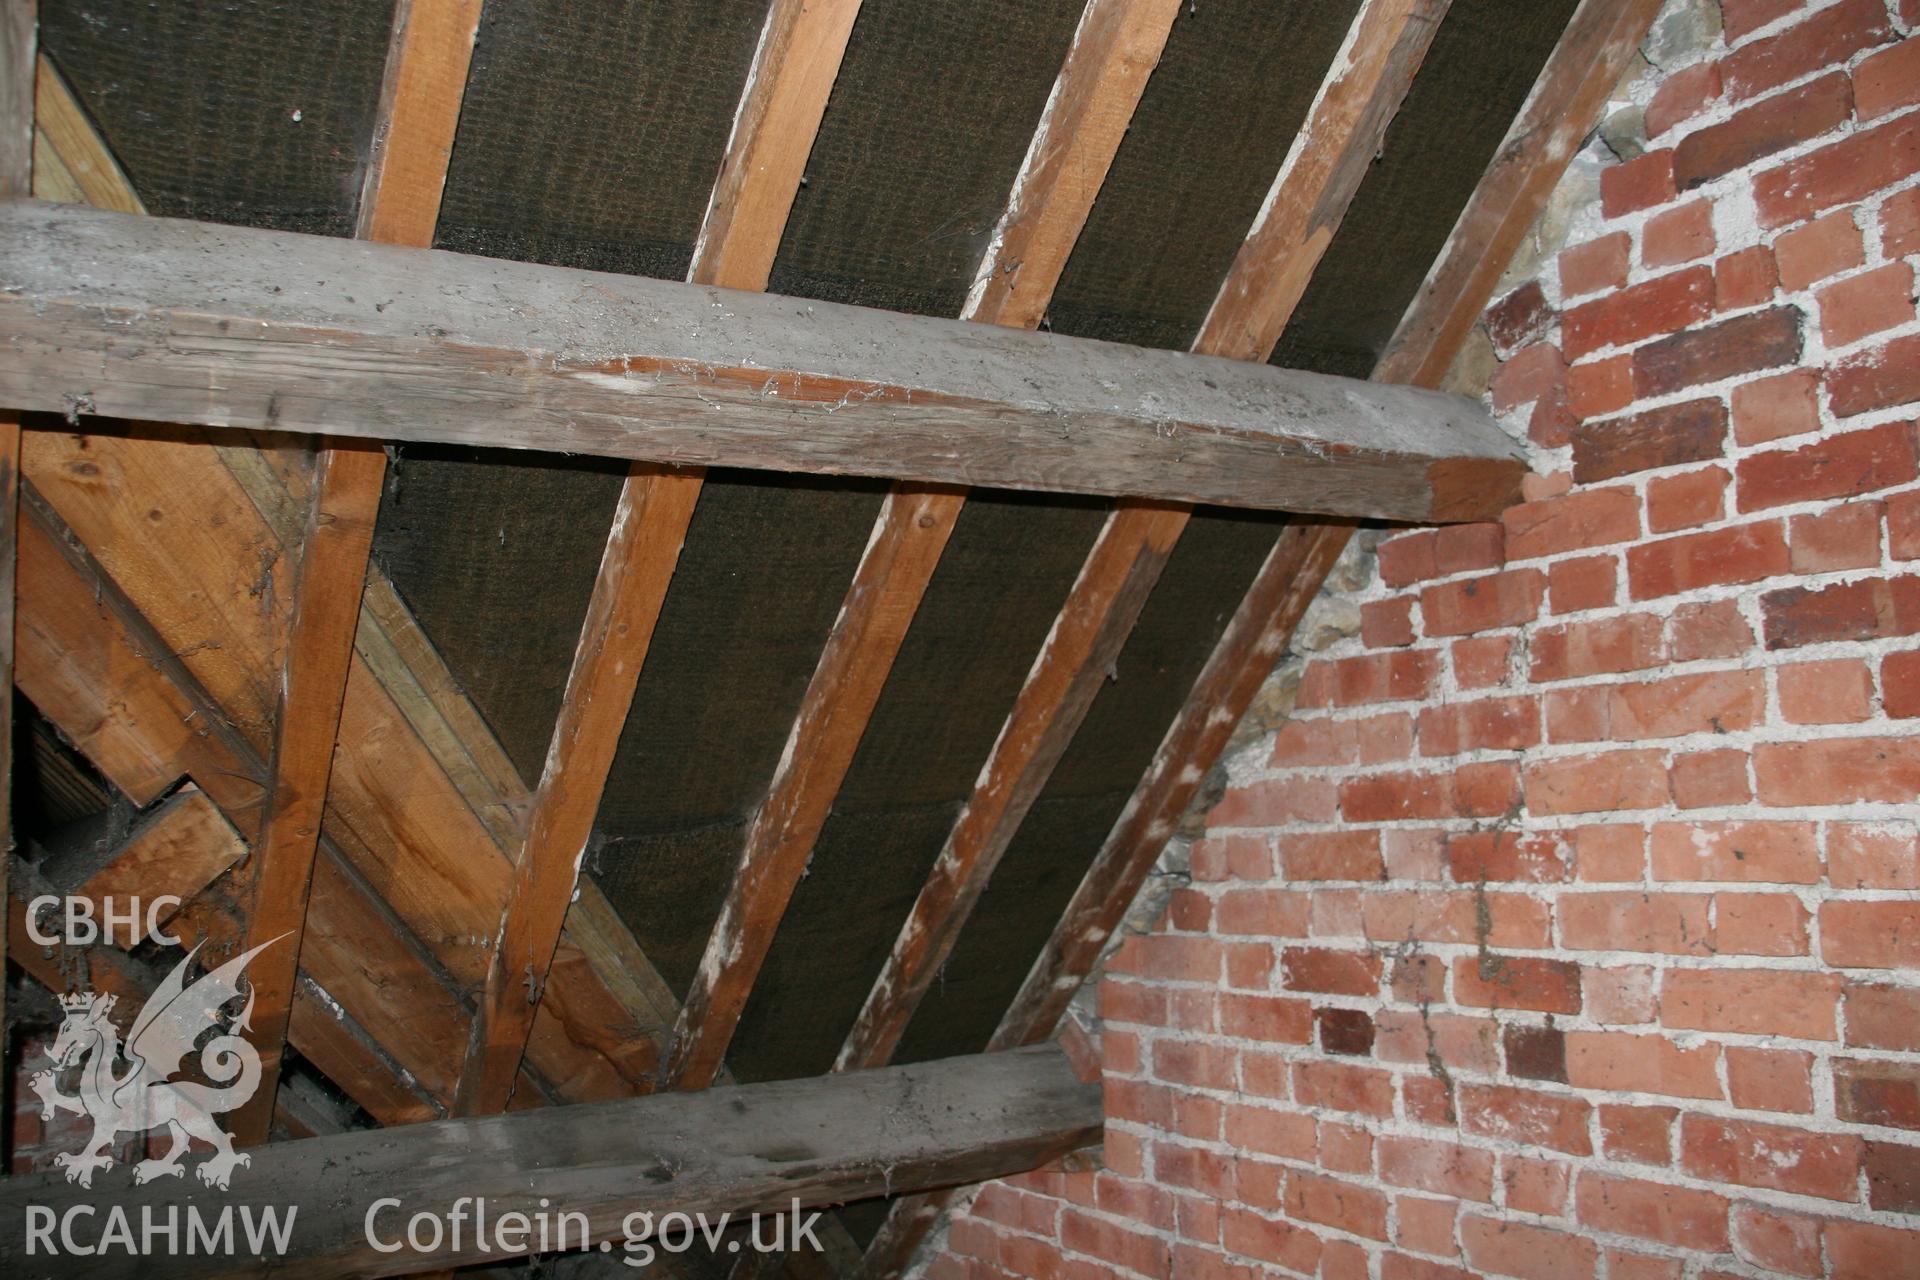 Photograph showing detailed interior view of brick wall, wooden beams and roof of former Llawrybettws Welsh Calvinistic Methodist chapel, Glanyrafon, Corwen. Produced by Tim Allen on 27th February 2019 to meet a condition attached to planning application.